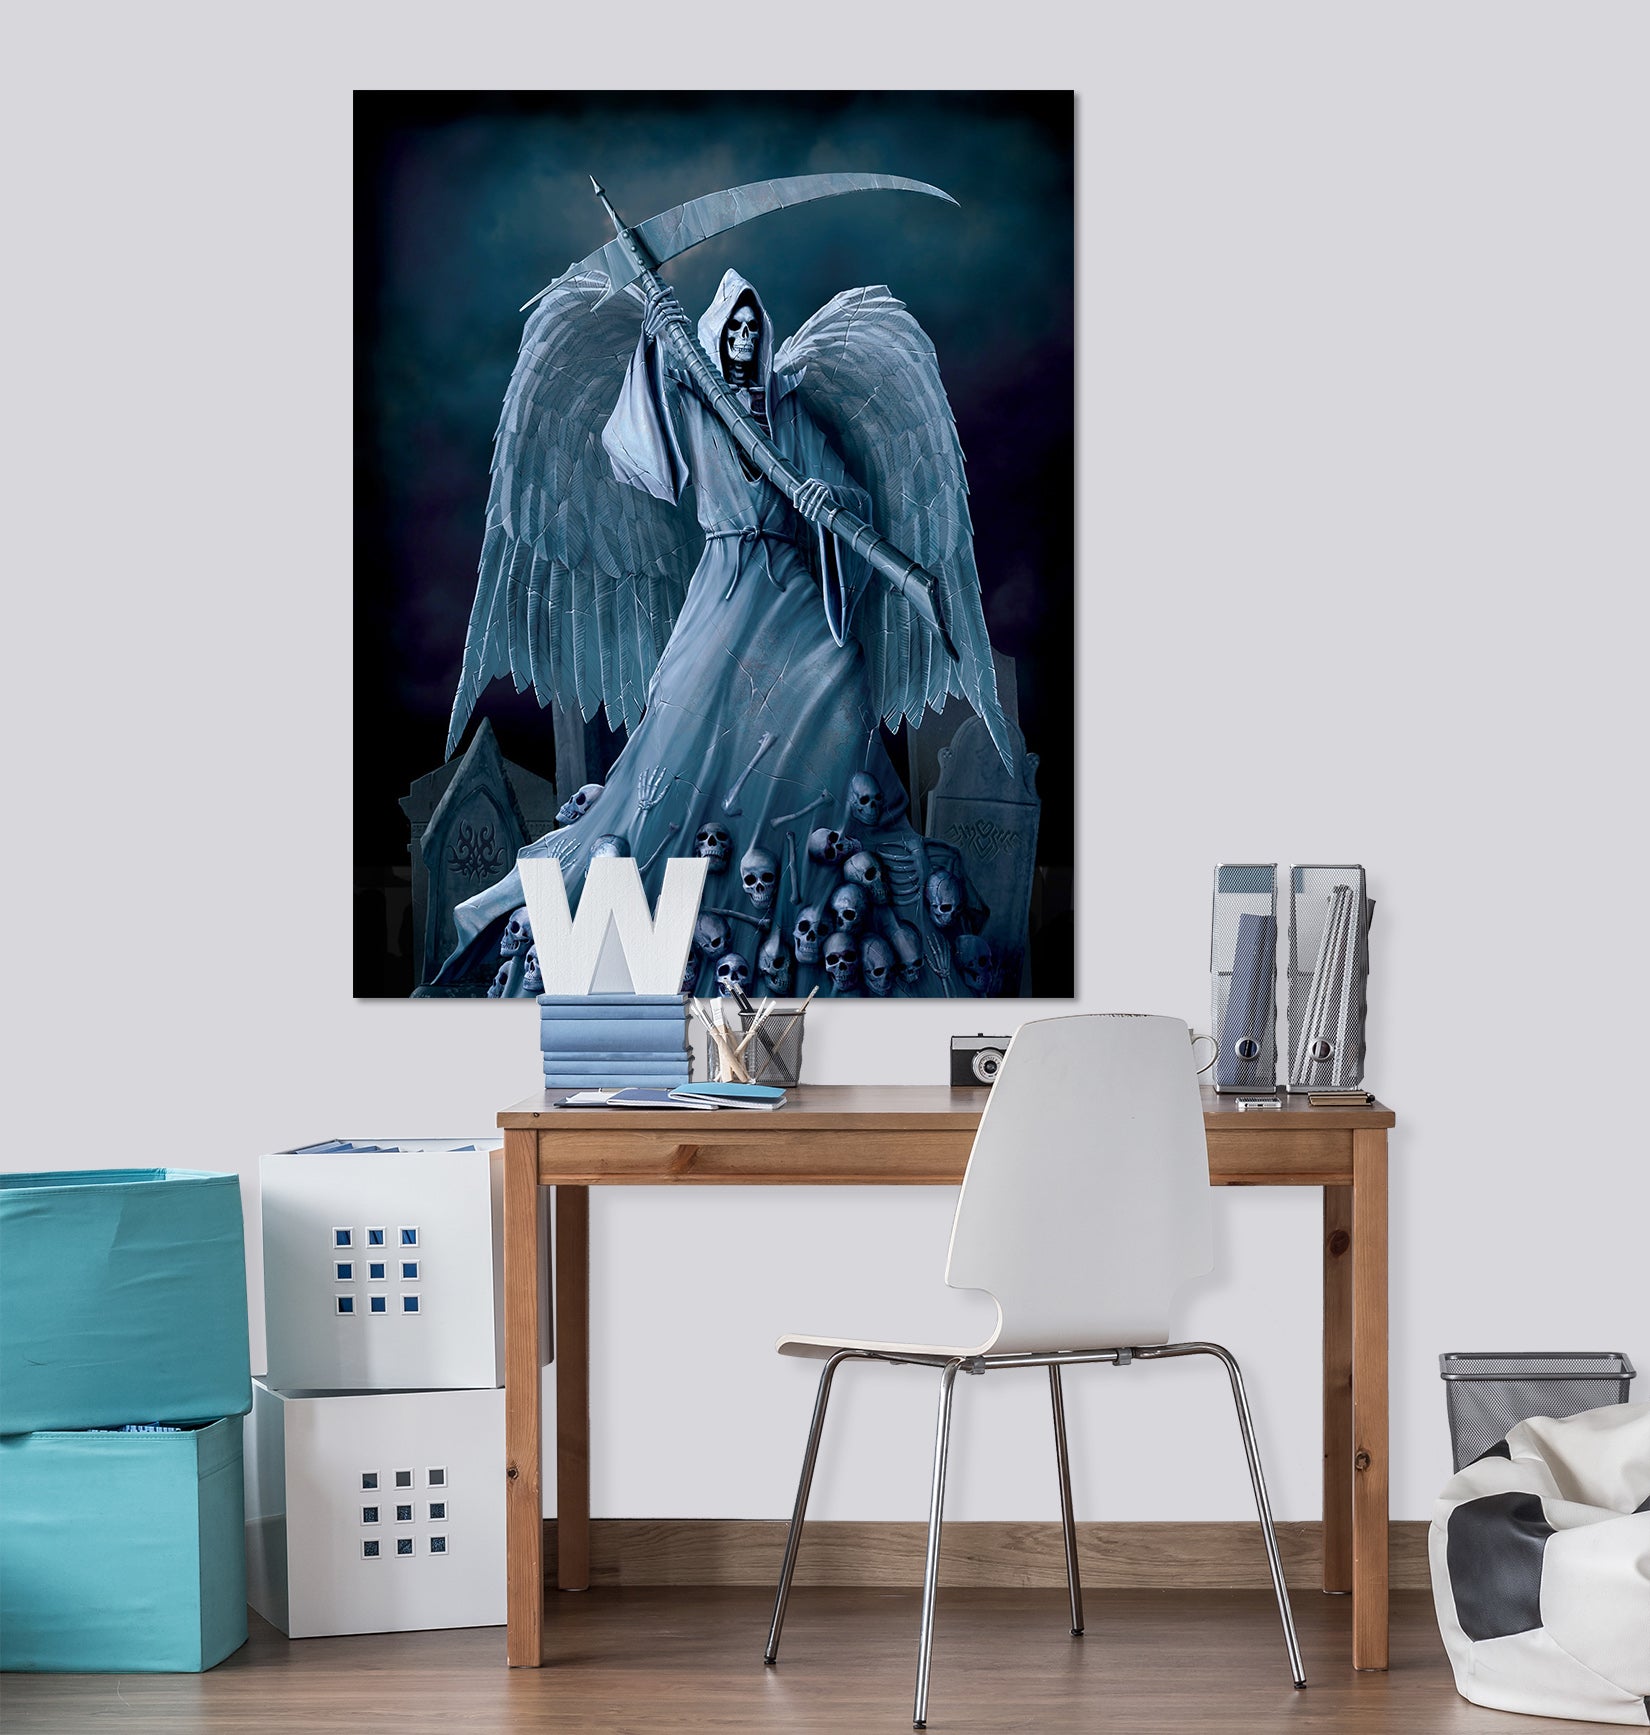 3D Death On A Hold 030 Vincent Hie Wall Sticker